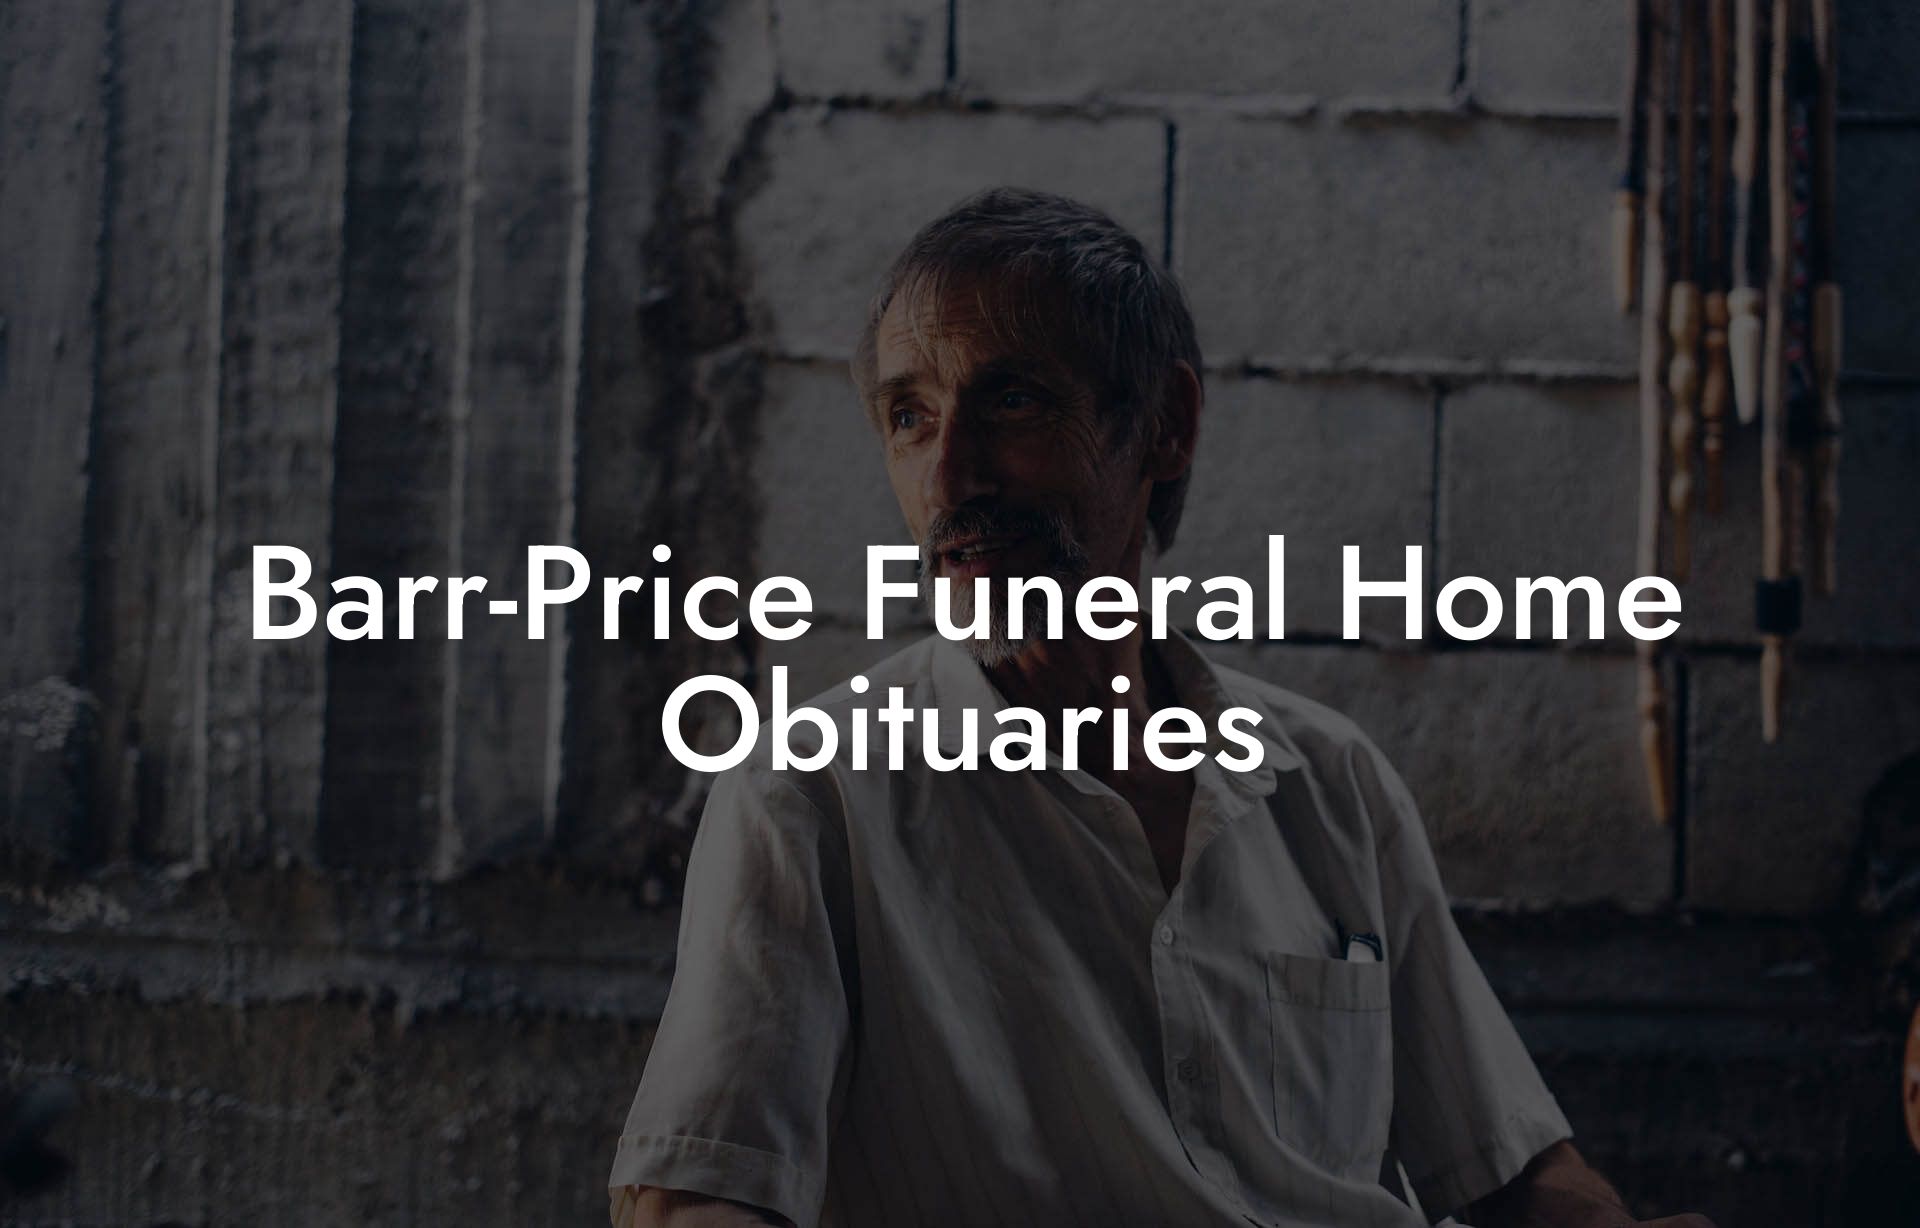 Barr-Price Funeral Home Obituaries